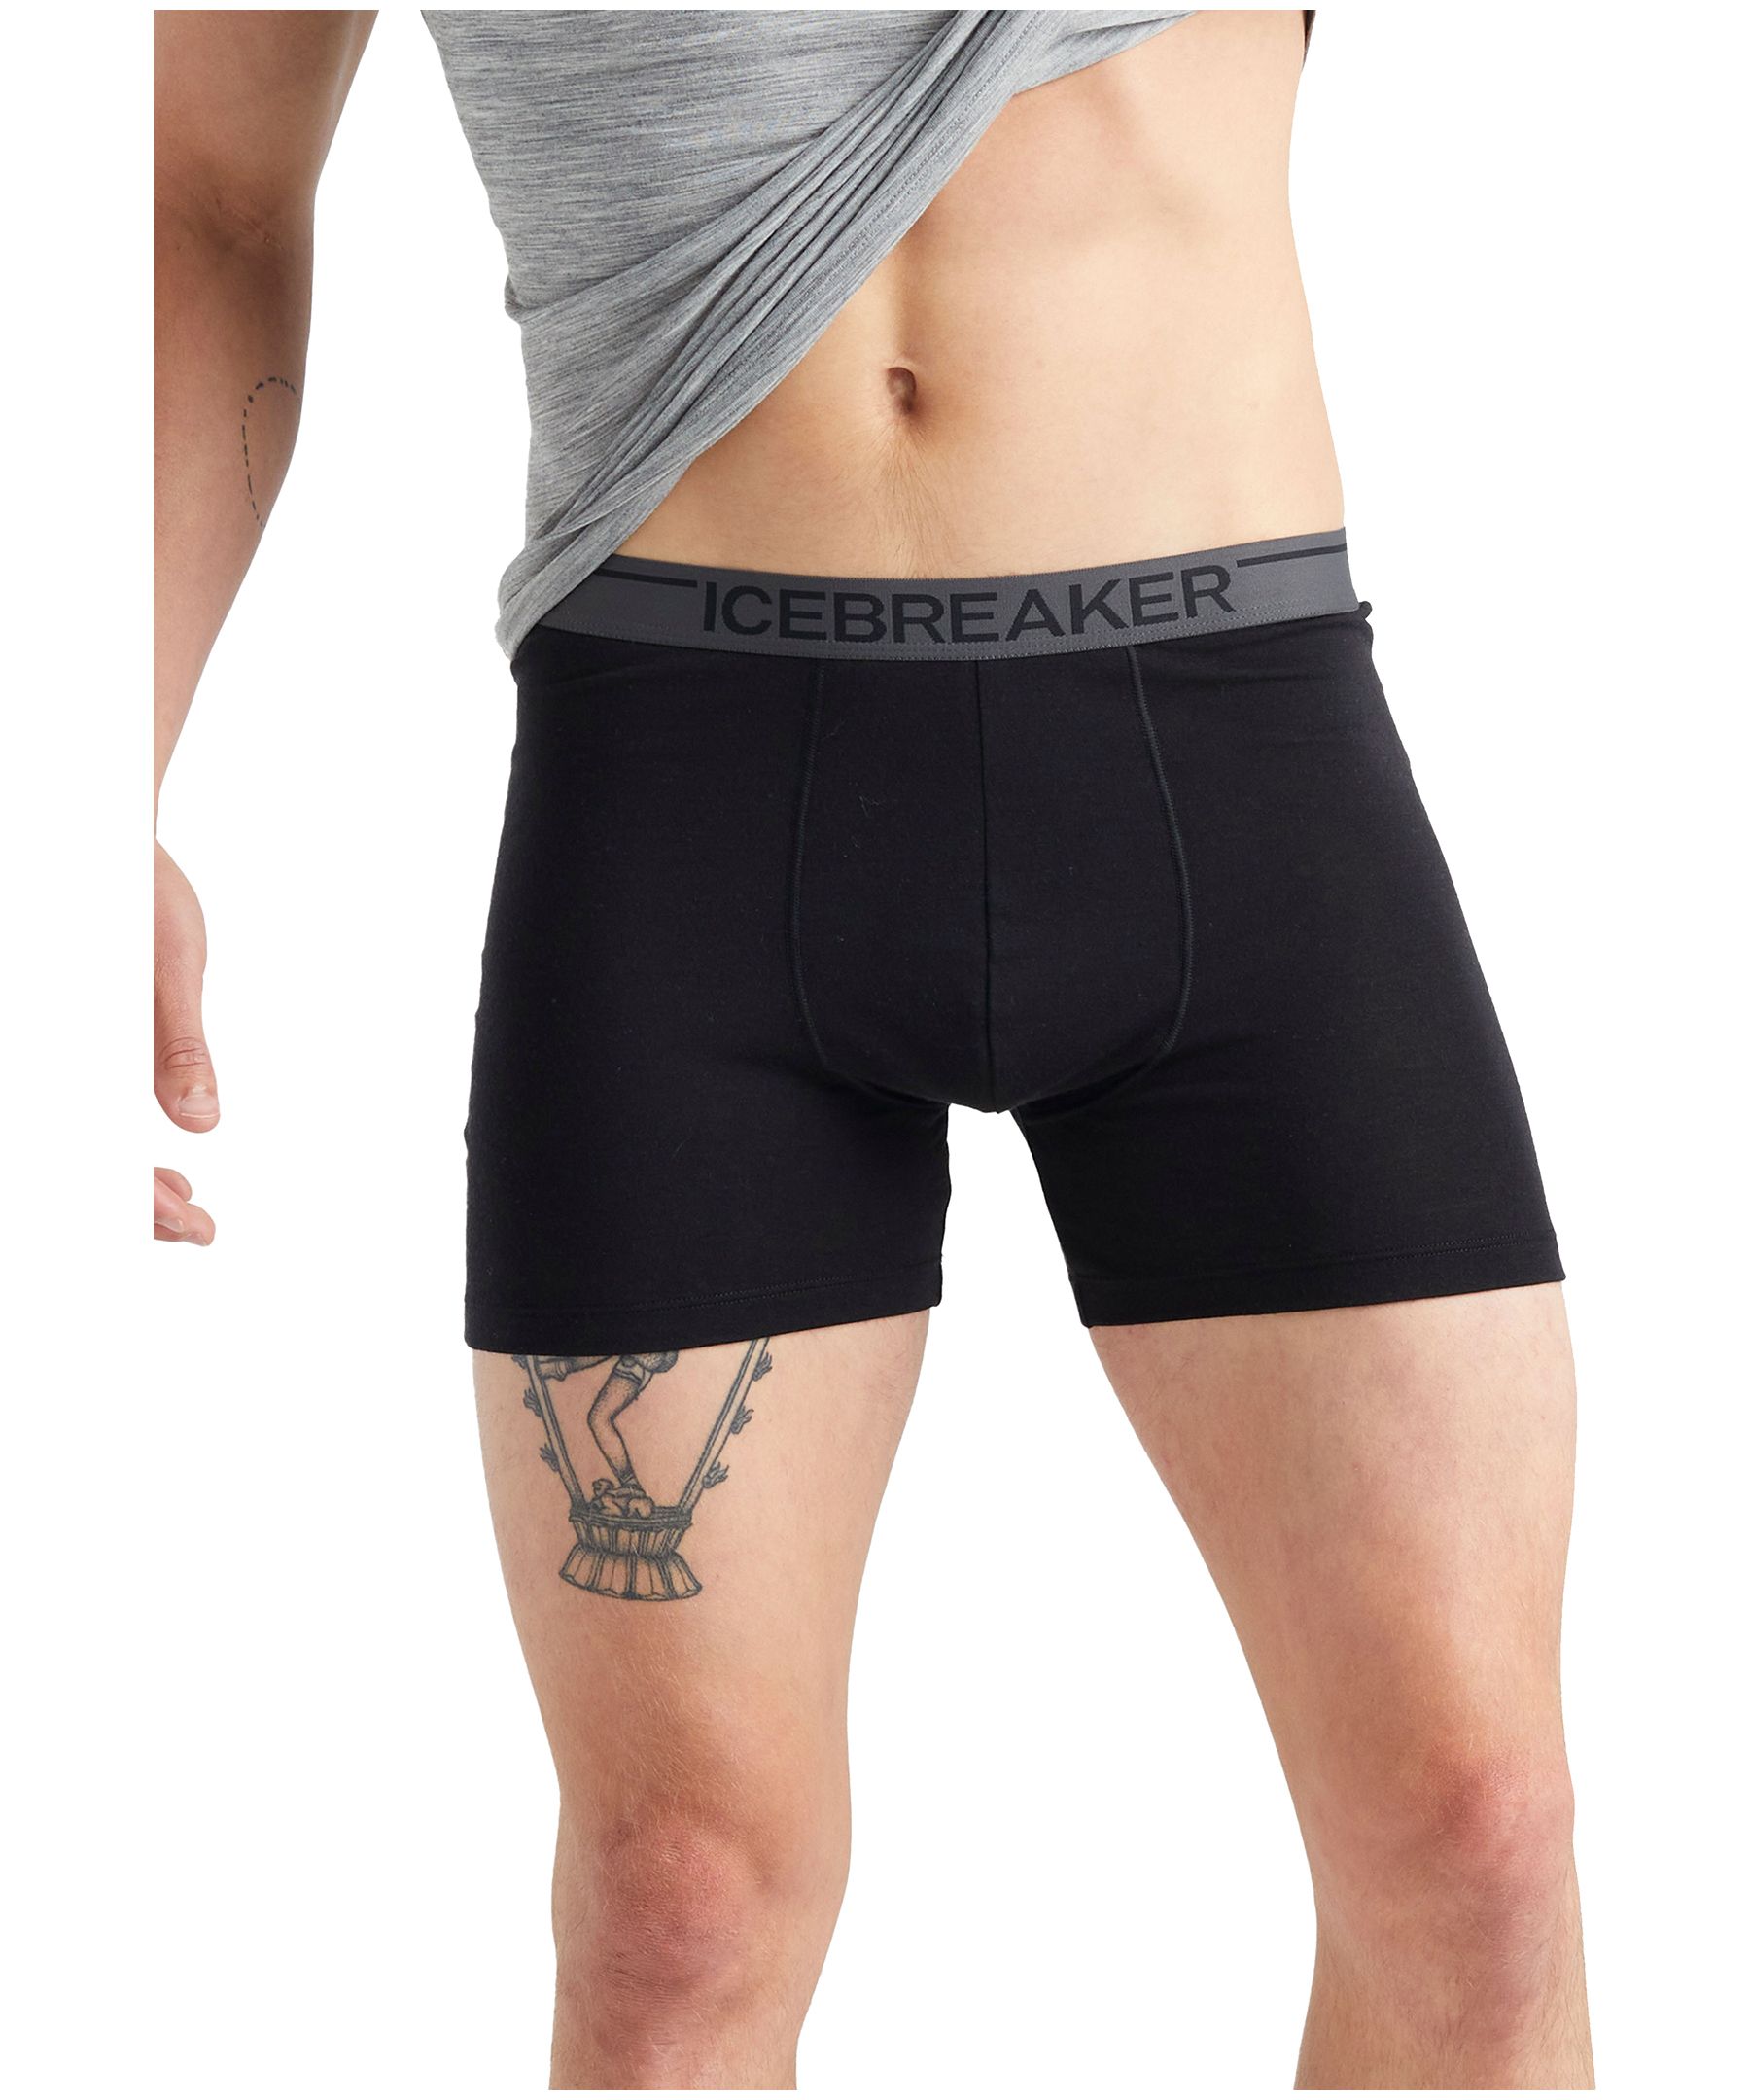 https://media-www.marks.com/product/marks-work-wearhouse/industrial-world/mens-underwear-and-loungewear/410035496806/icebreaker-men-s-anatomica-boxers-438e79c9-4ab4-4c65-9083-b3aaa7e0d369-jpgrendition.jpg?imdensity=1&imwidth=1244&impolicy=mZoom